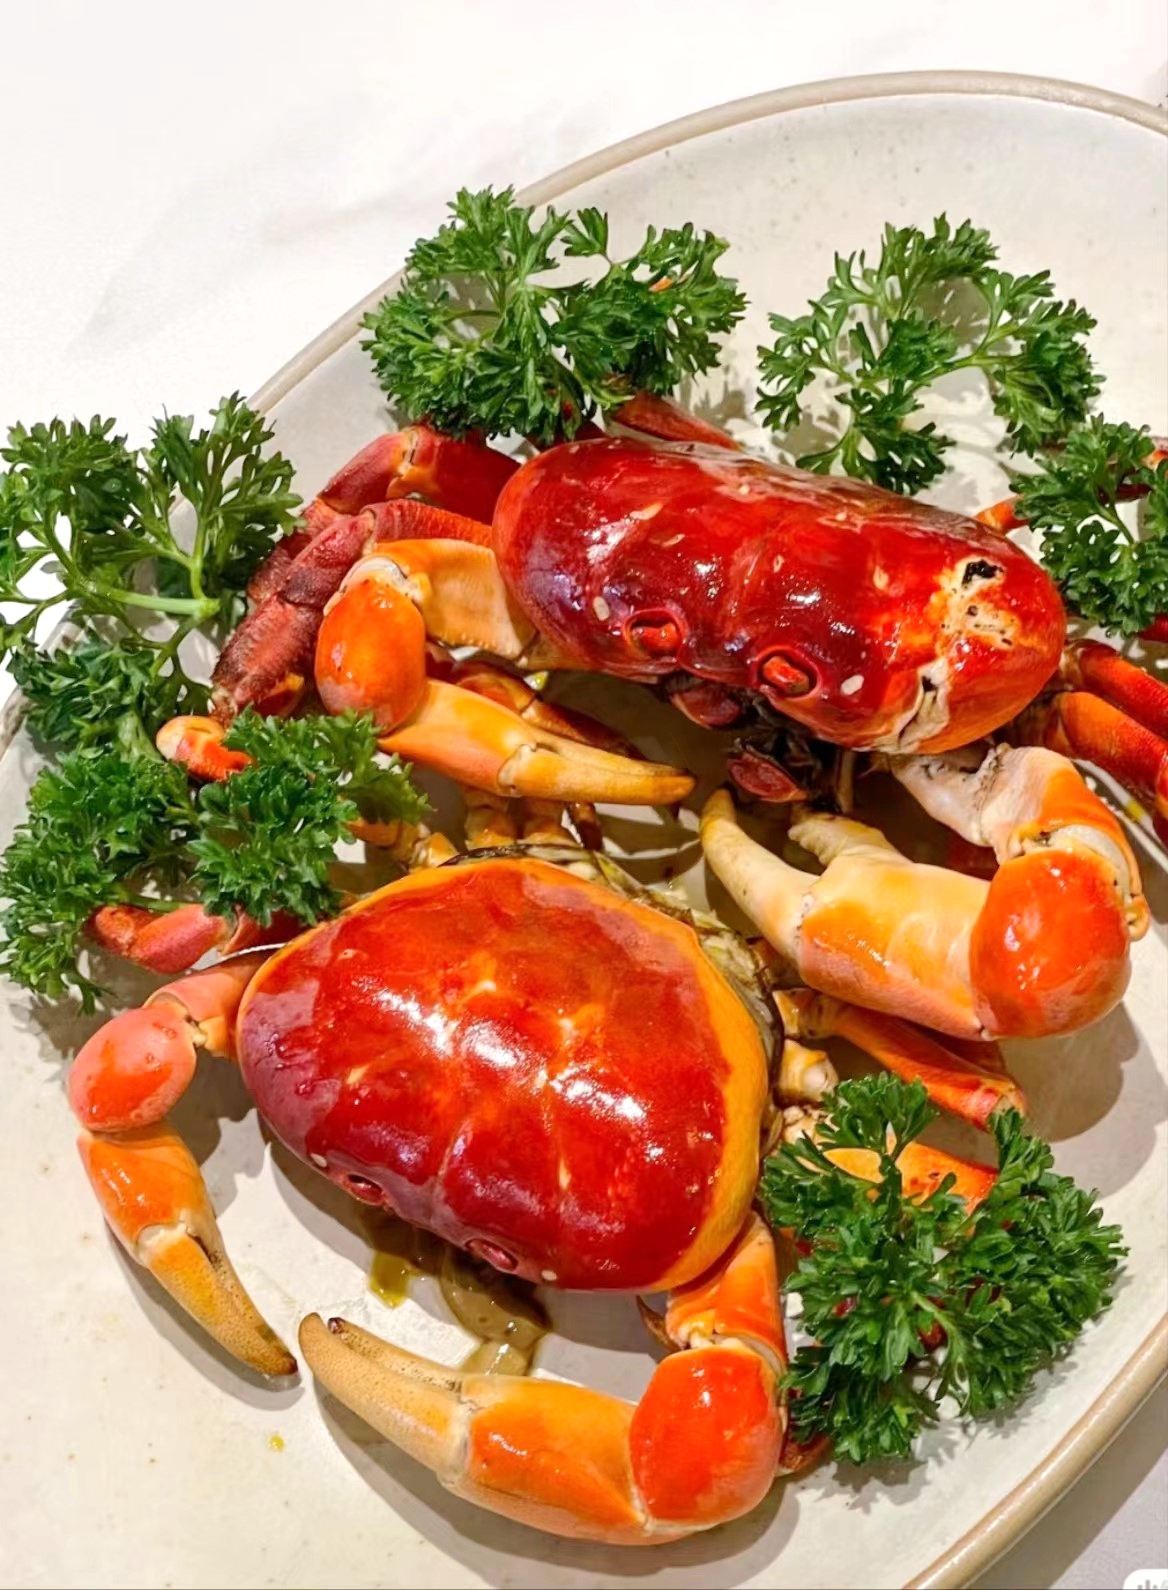 The brown crab is named after its bread-like appearance and is known for its large size, creamy texture and fresh succulent taste. /Photo provided to CGTN